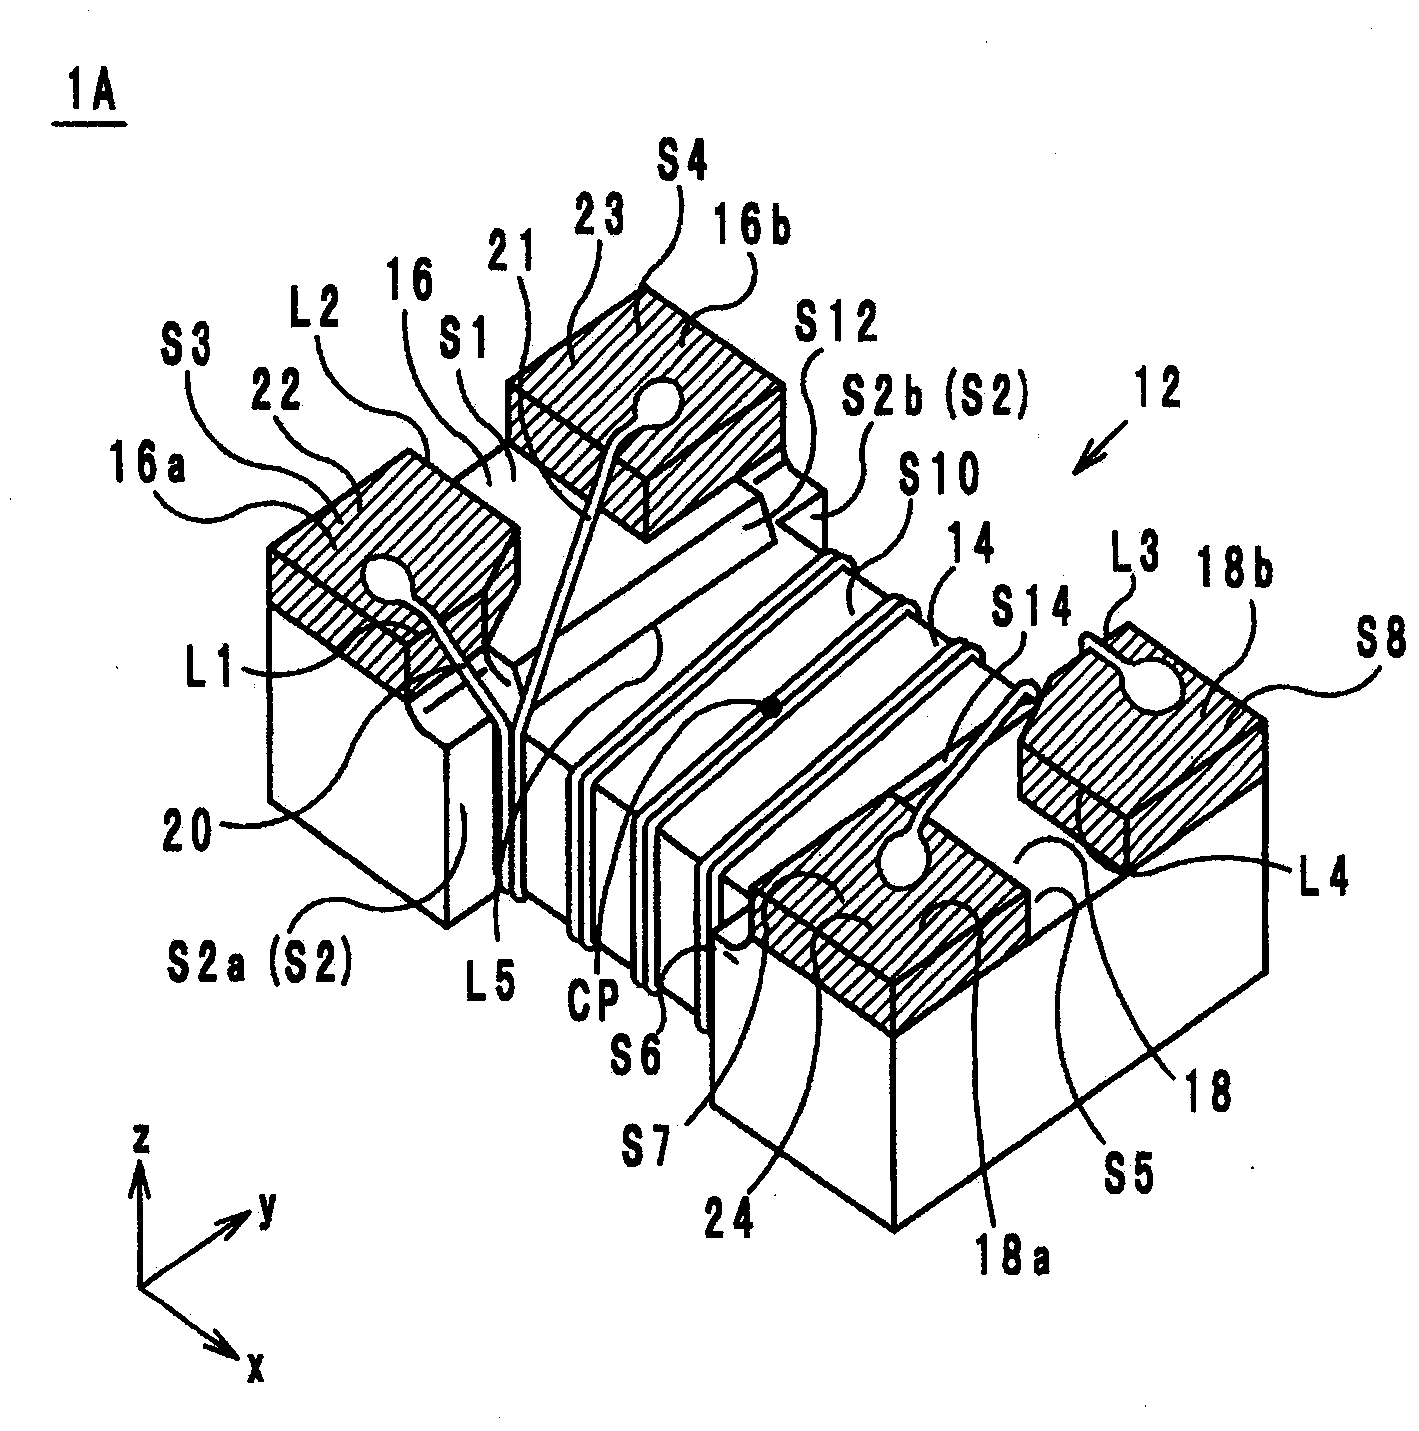 Core for wire-wound electronic component, wire-wound electronic component, and common mode choke coil